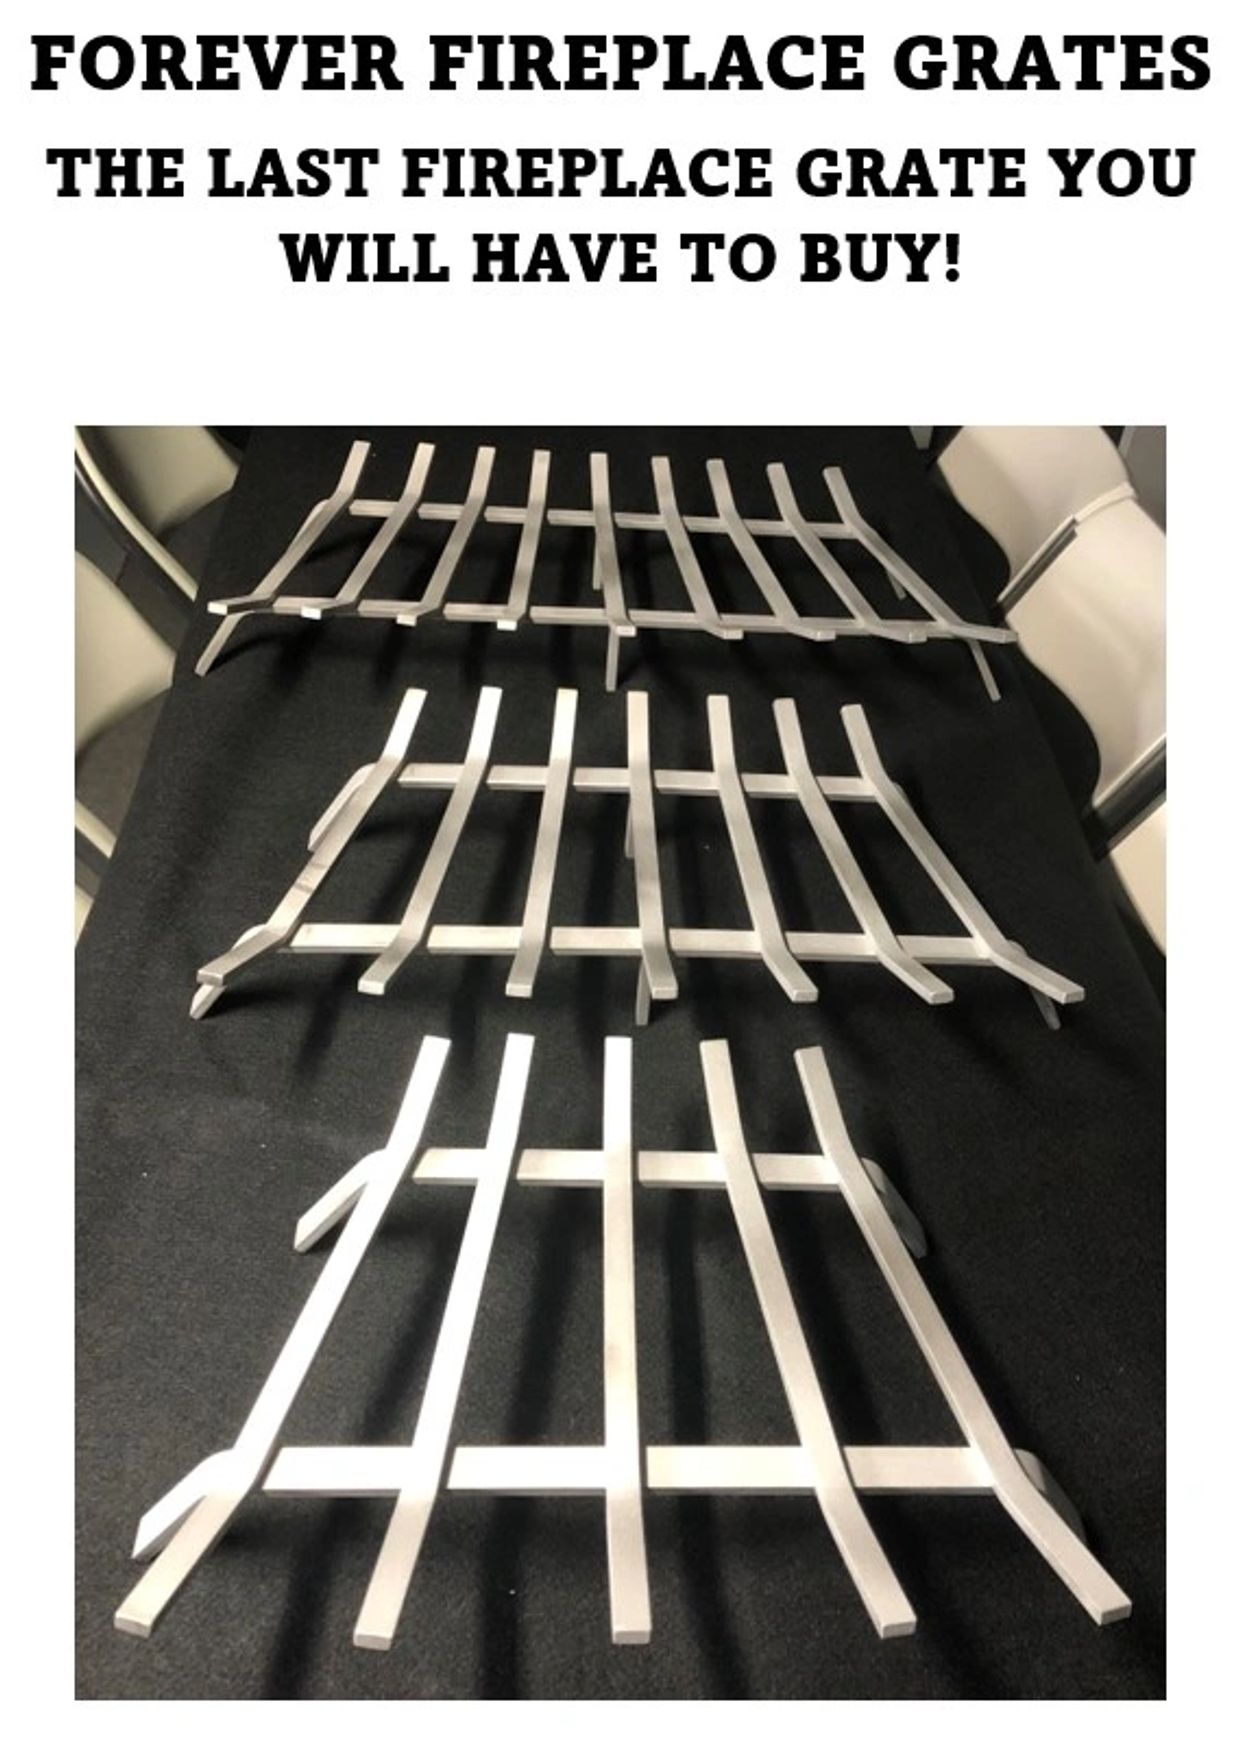 ChimGuard Forever Fireplace Grates